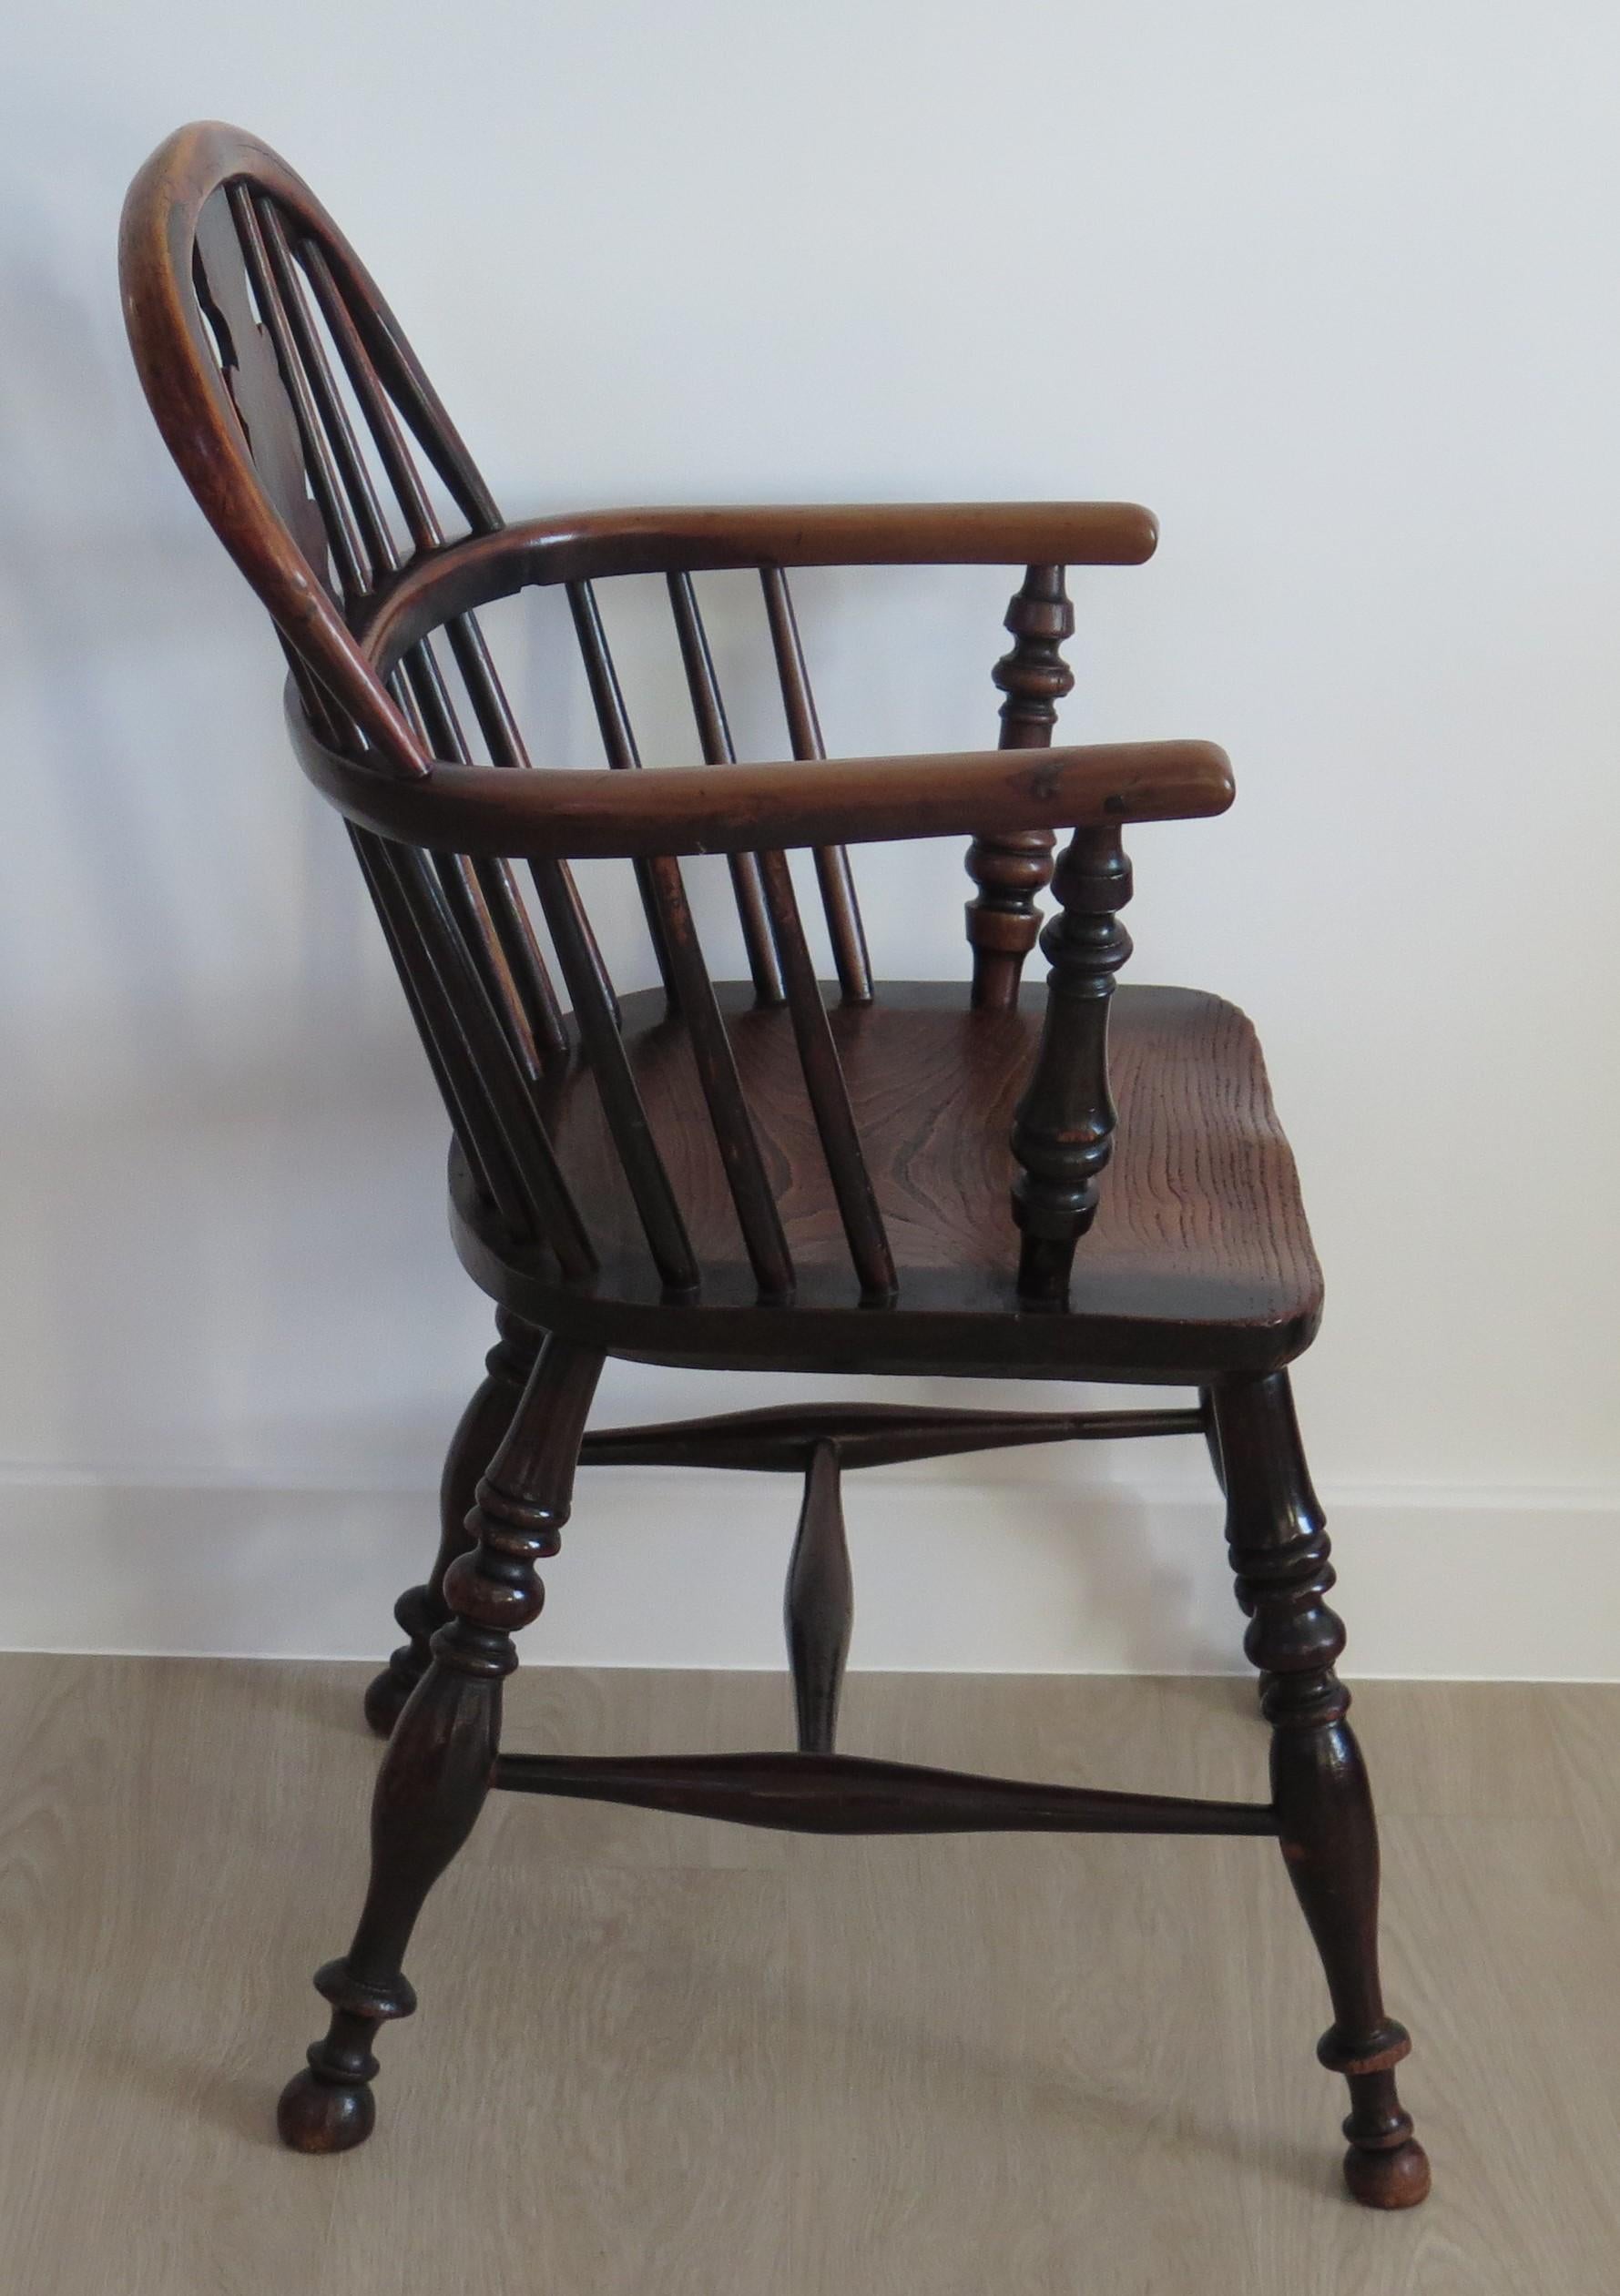 Country Yew Wood Low-Back Windsor Armchair, North East Yorkshire England Circa 1850 For Sale